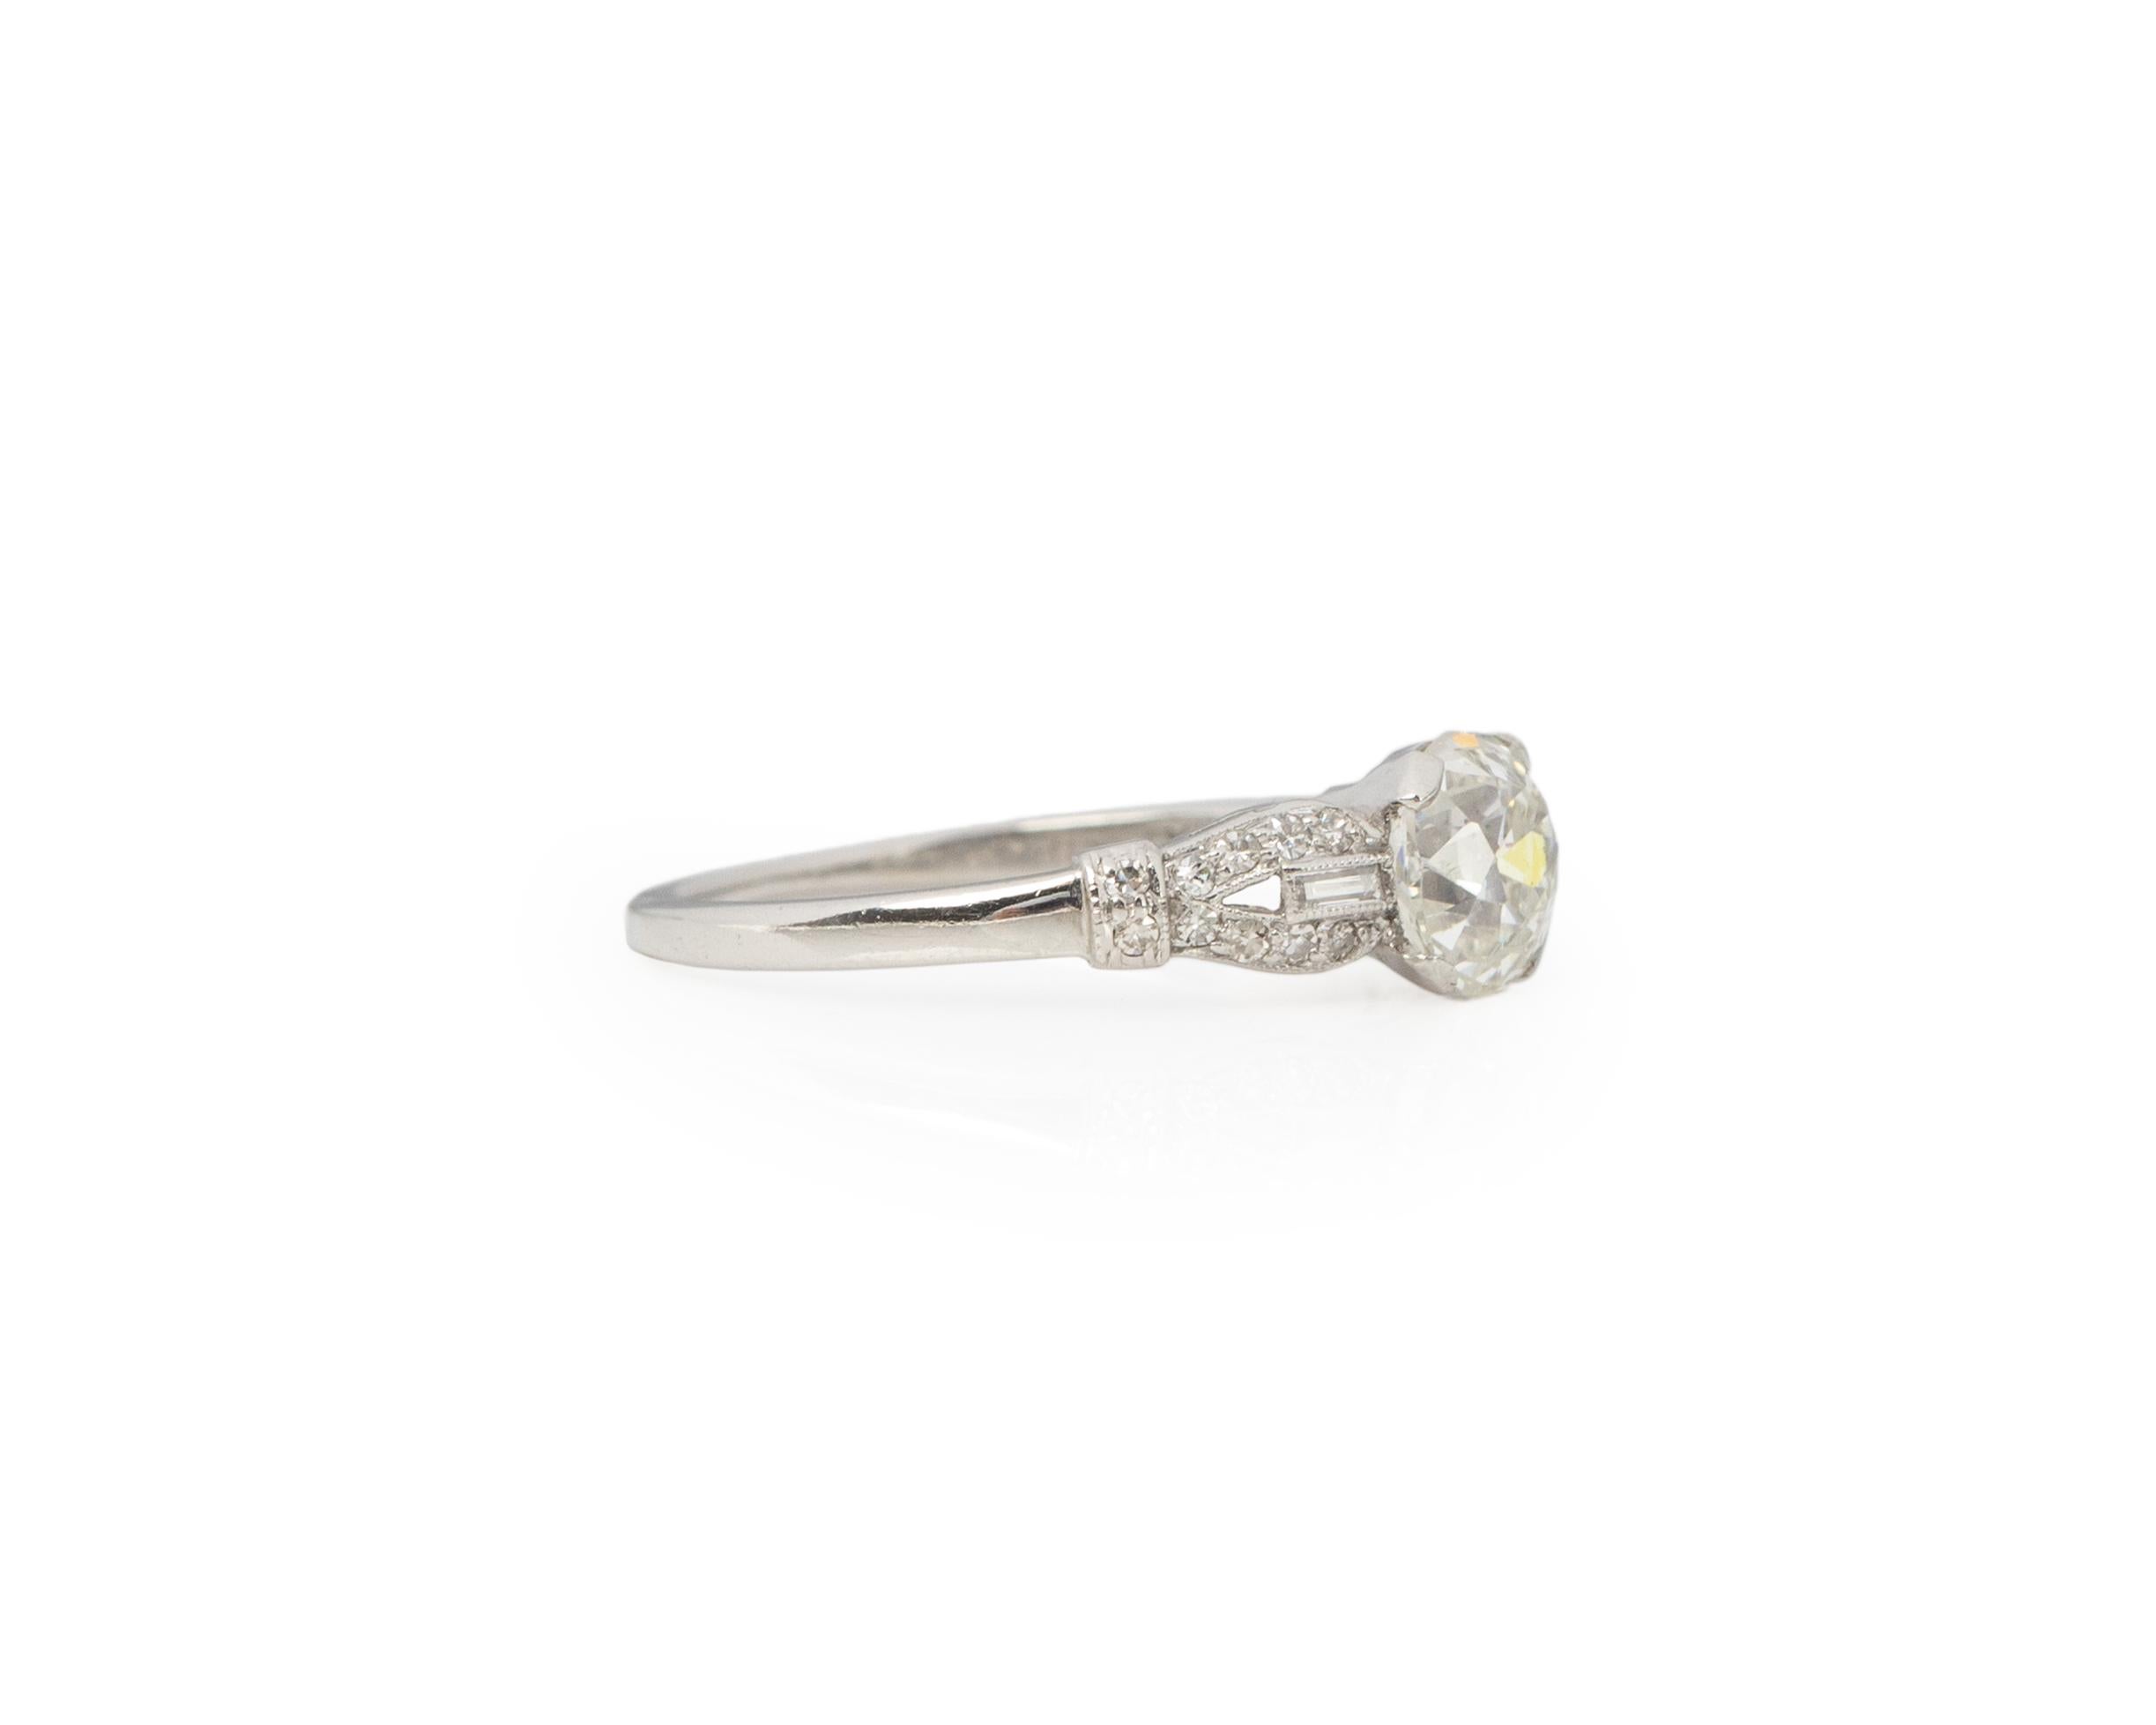 Ring Size: 6.25
Metal Type: Platinum [Hallmarked, and Tested]
Weight: 2.9grams

Center Diamond Details:
GIA LAB REPORT #: 1226860061
Weight: 1.13ct
Cut: Old Mine Brilliant
Color: I
Clarity: VS2
Measurements: 6.06mm x 5.83mm x 4.40mm

Side Diamond